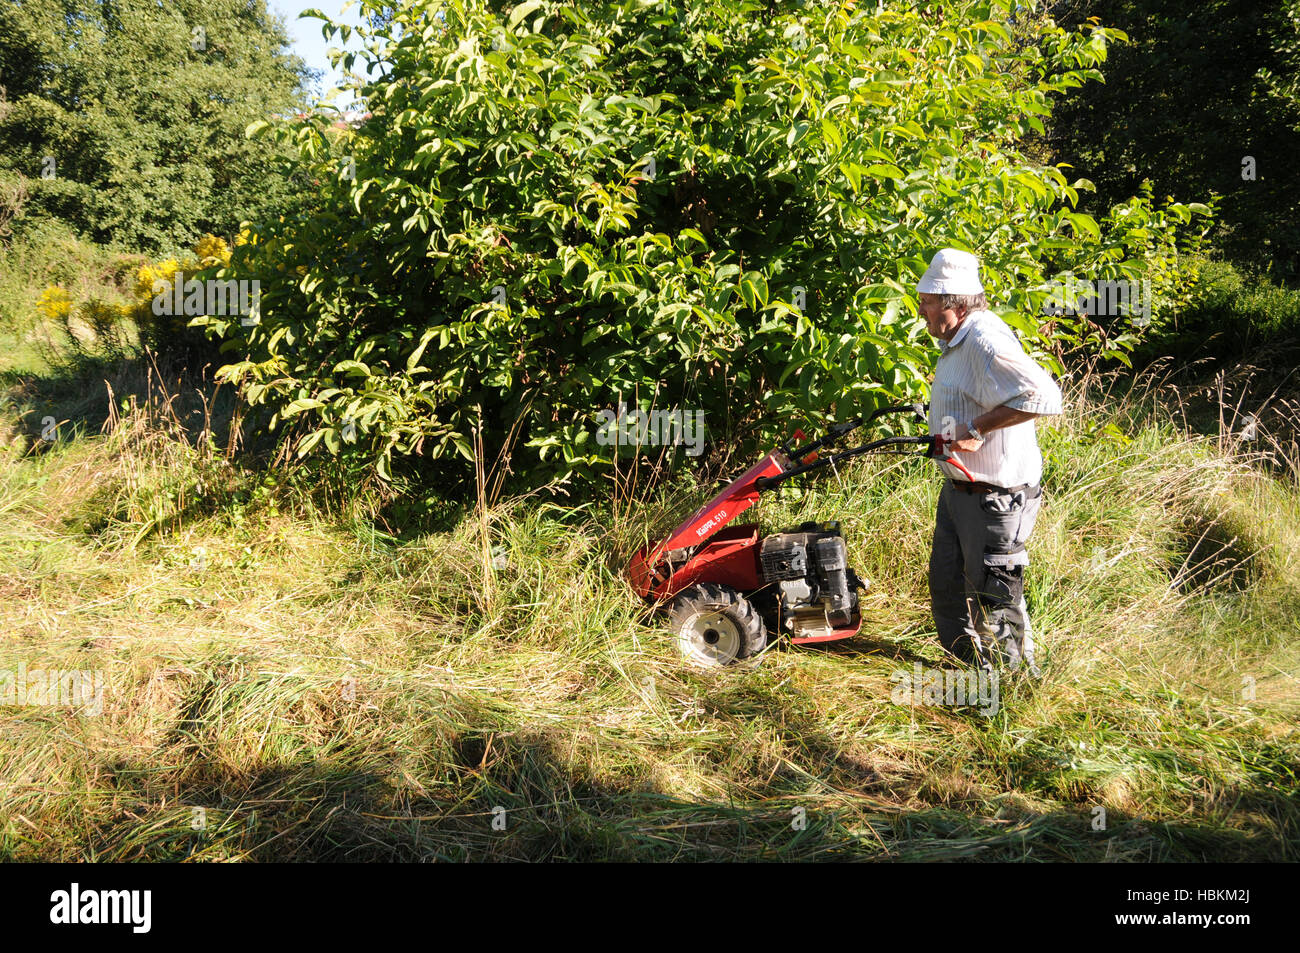 meadow mowing with sickle bar mower Stock Photo